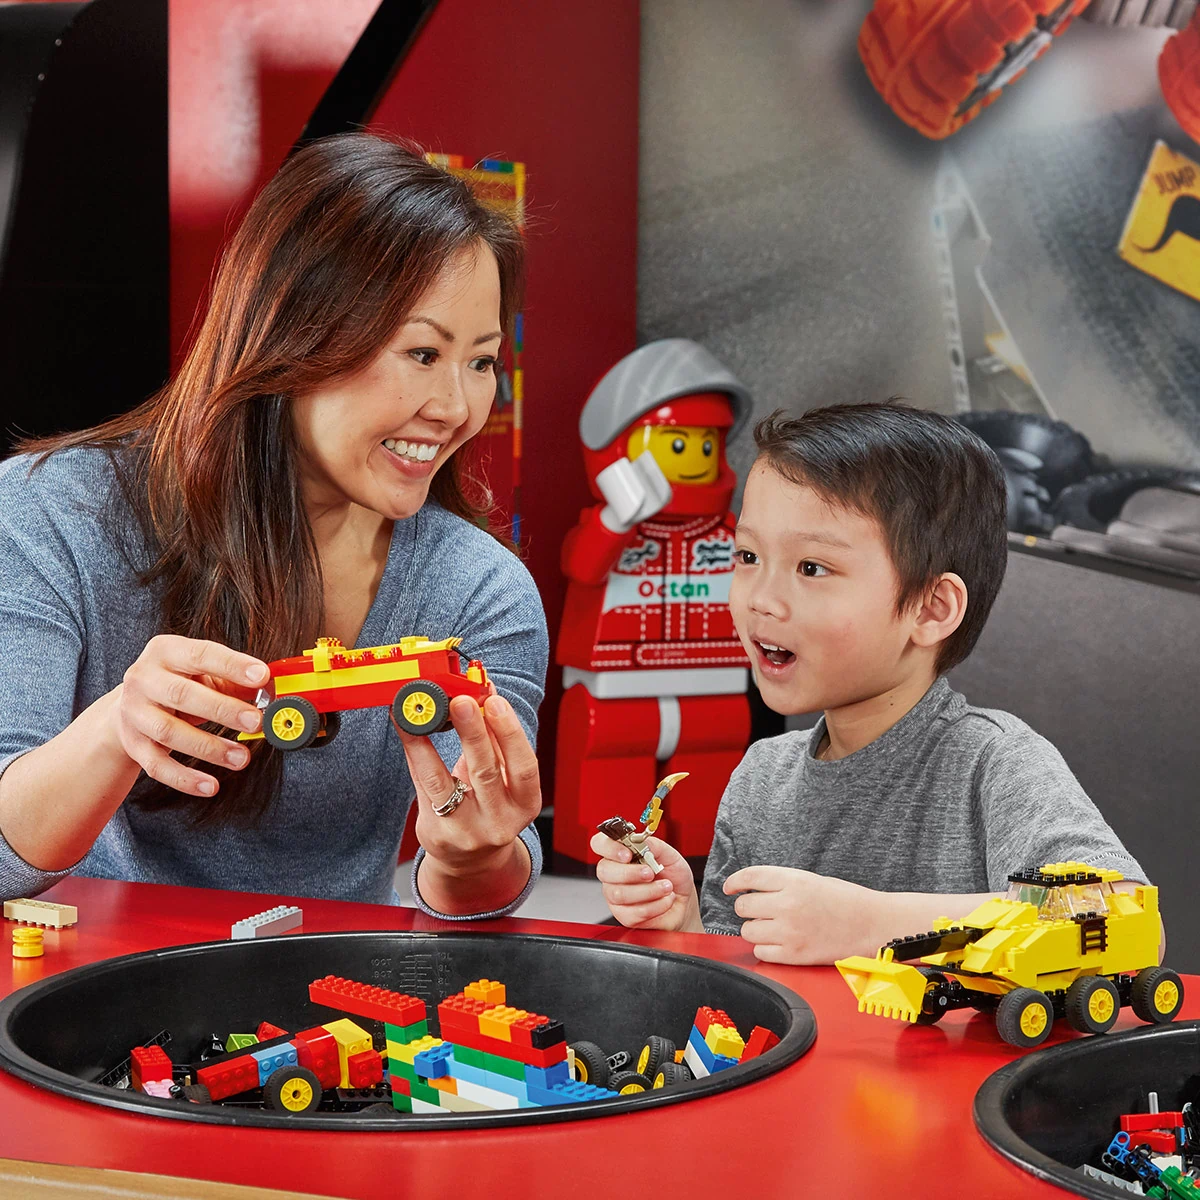 LEGOLAND® Discovery Centre Berlin, a mother is playing with Lego bricks with her son, she is holding a red car in her hands.